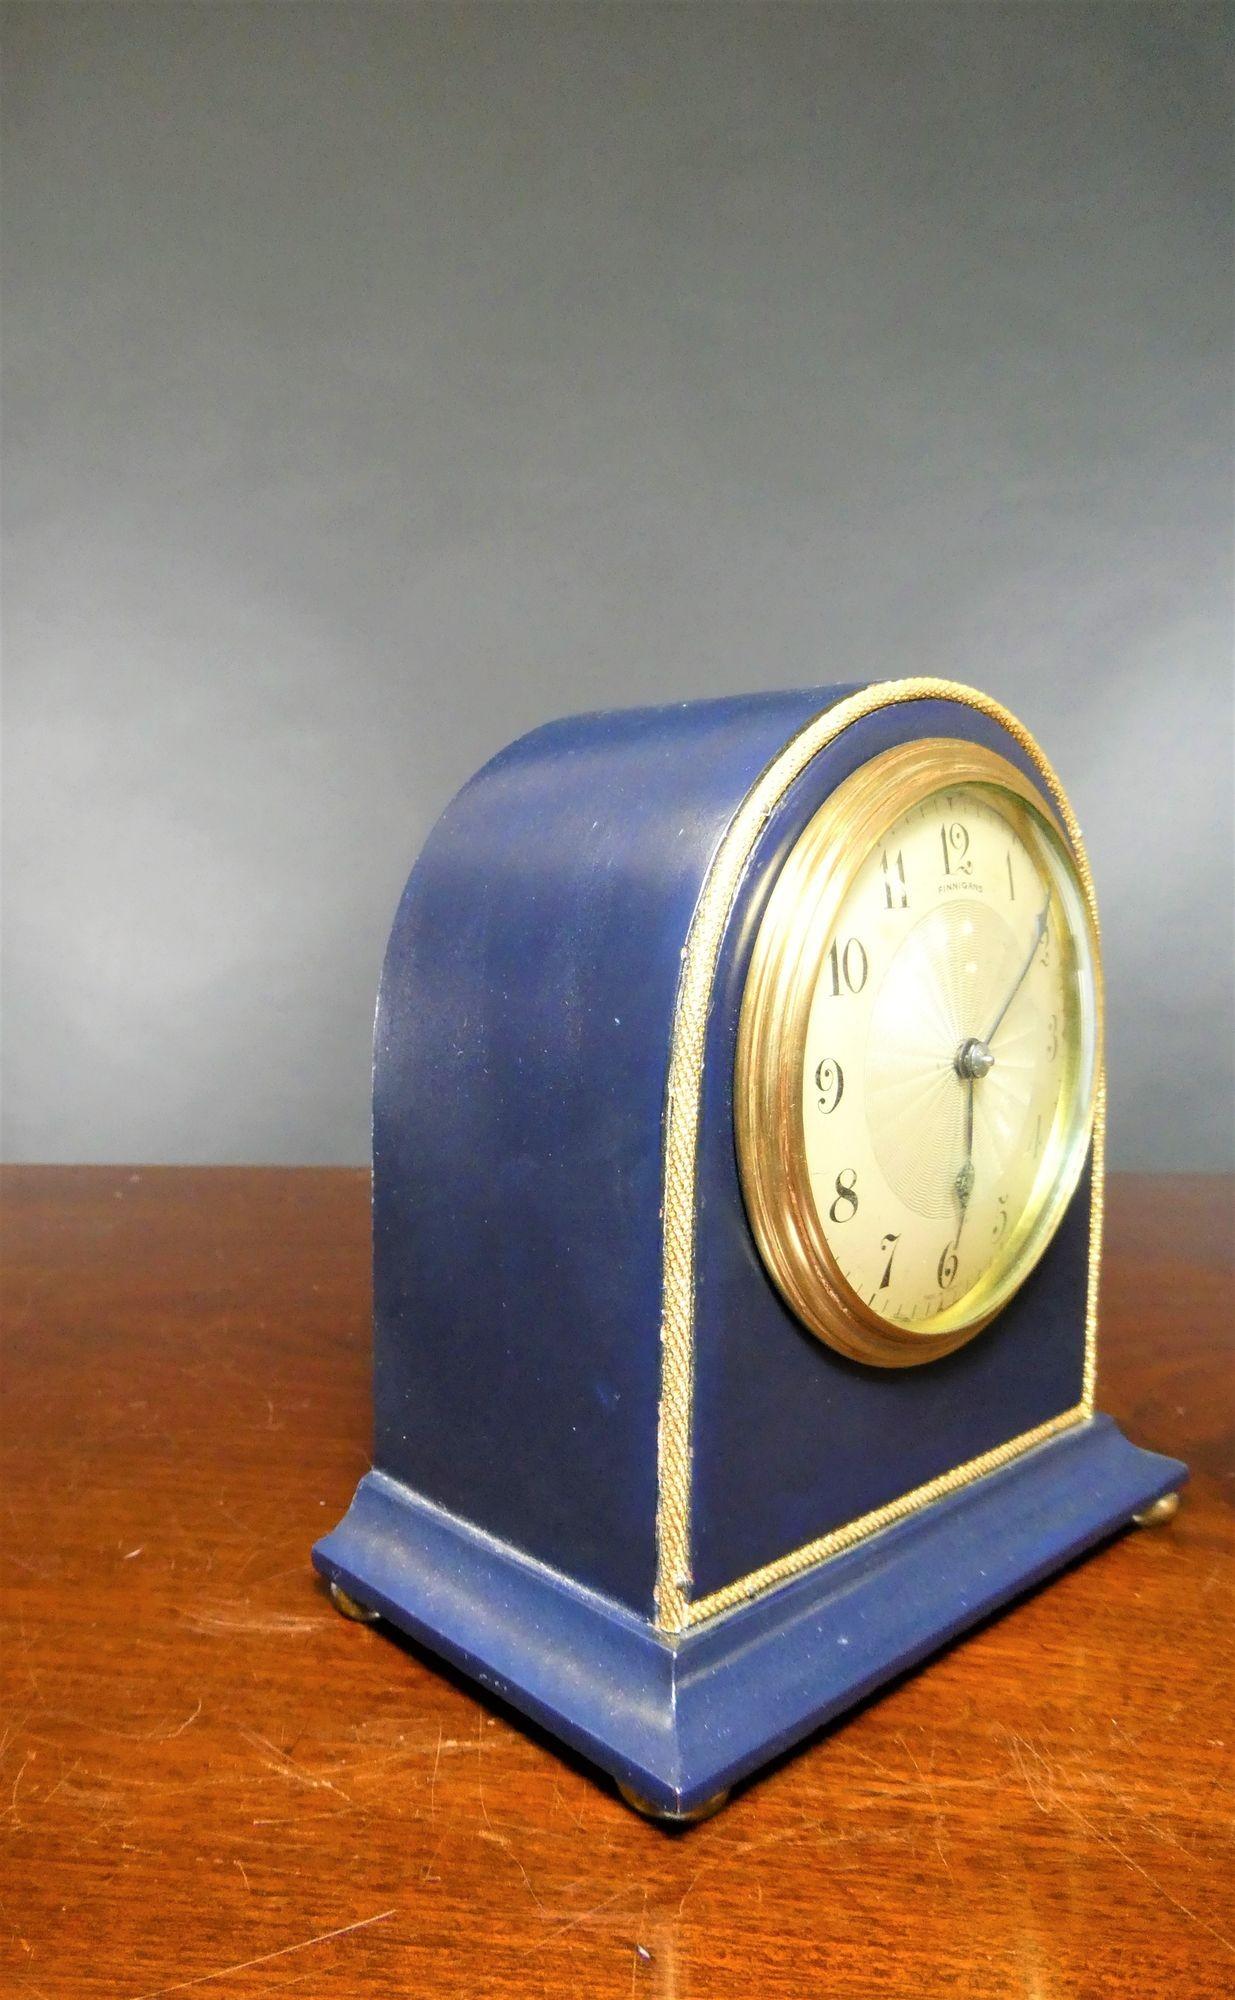 Arch top mantel clock standing on four brass bun feet with gilded decoration and brass bezel. Silvered dial with engine turned centre, Arabic numerals, original ‘blued’ steel hands signed ‘Finnigans’.
 
Eight day French movement with platform